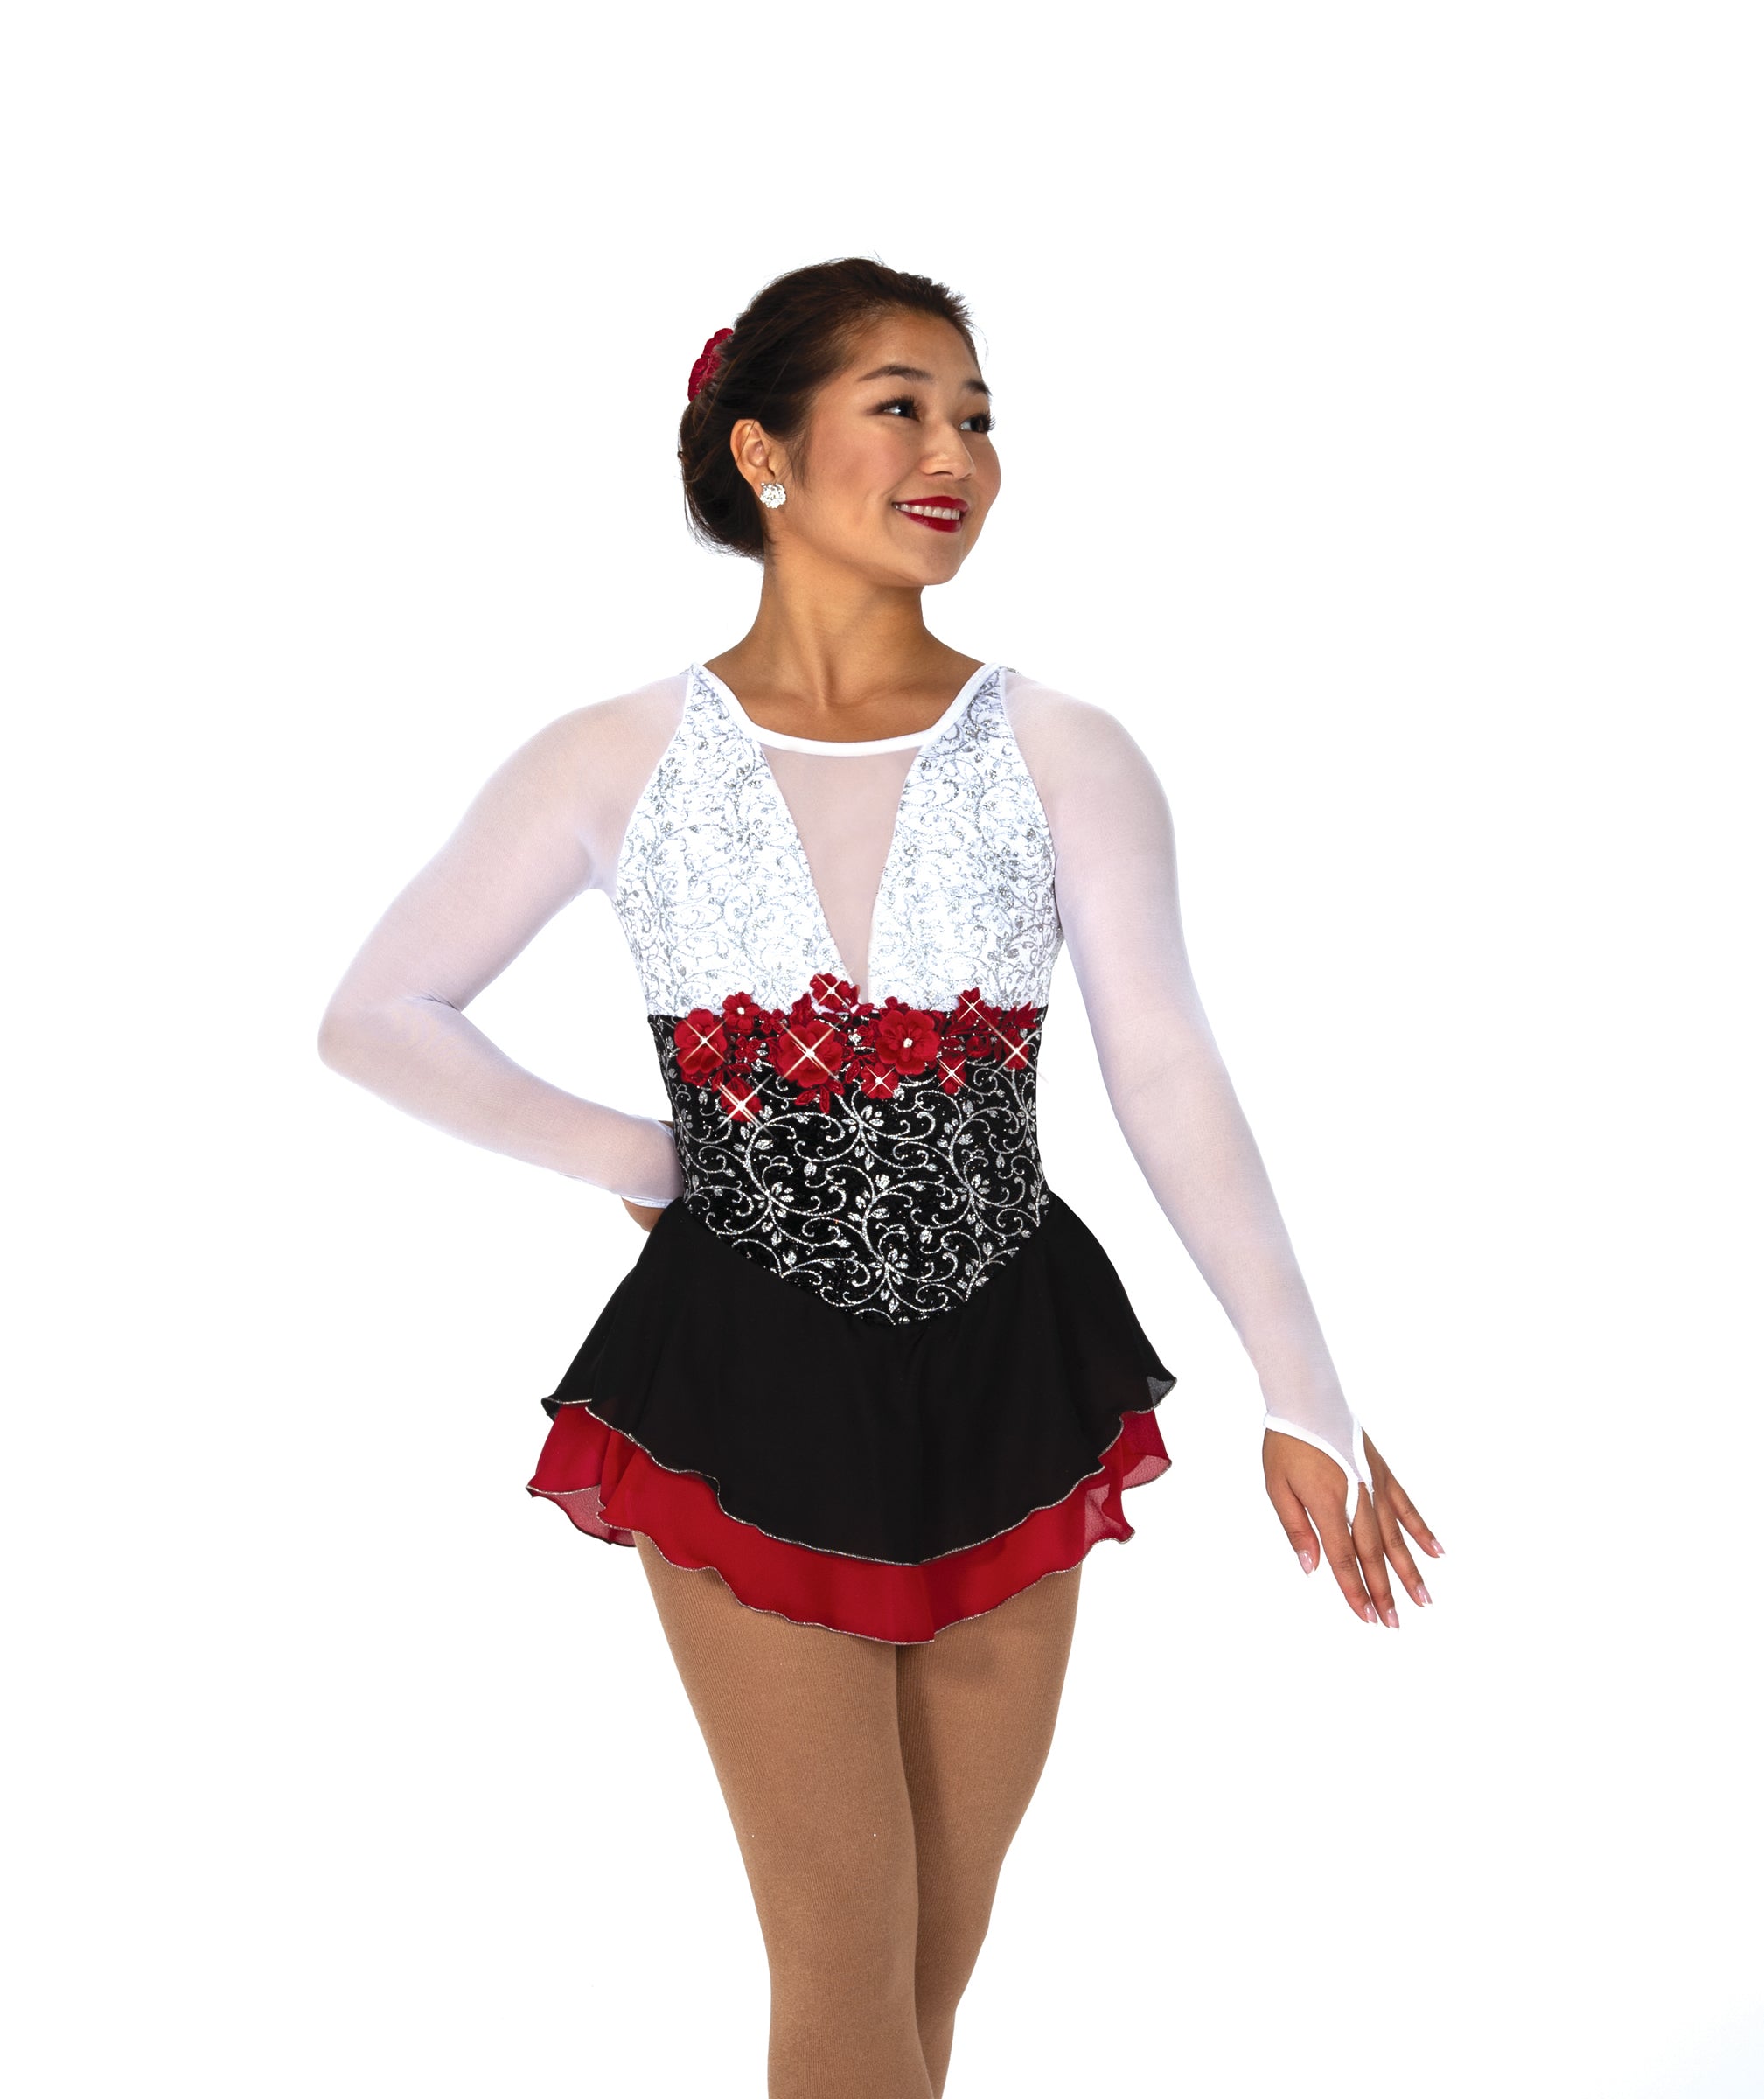  IceDress Figure Skating Outfit - Bows (Dark Grey and